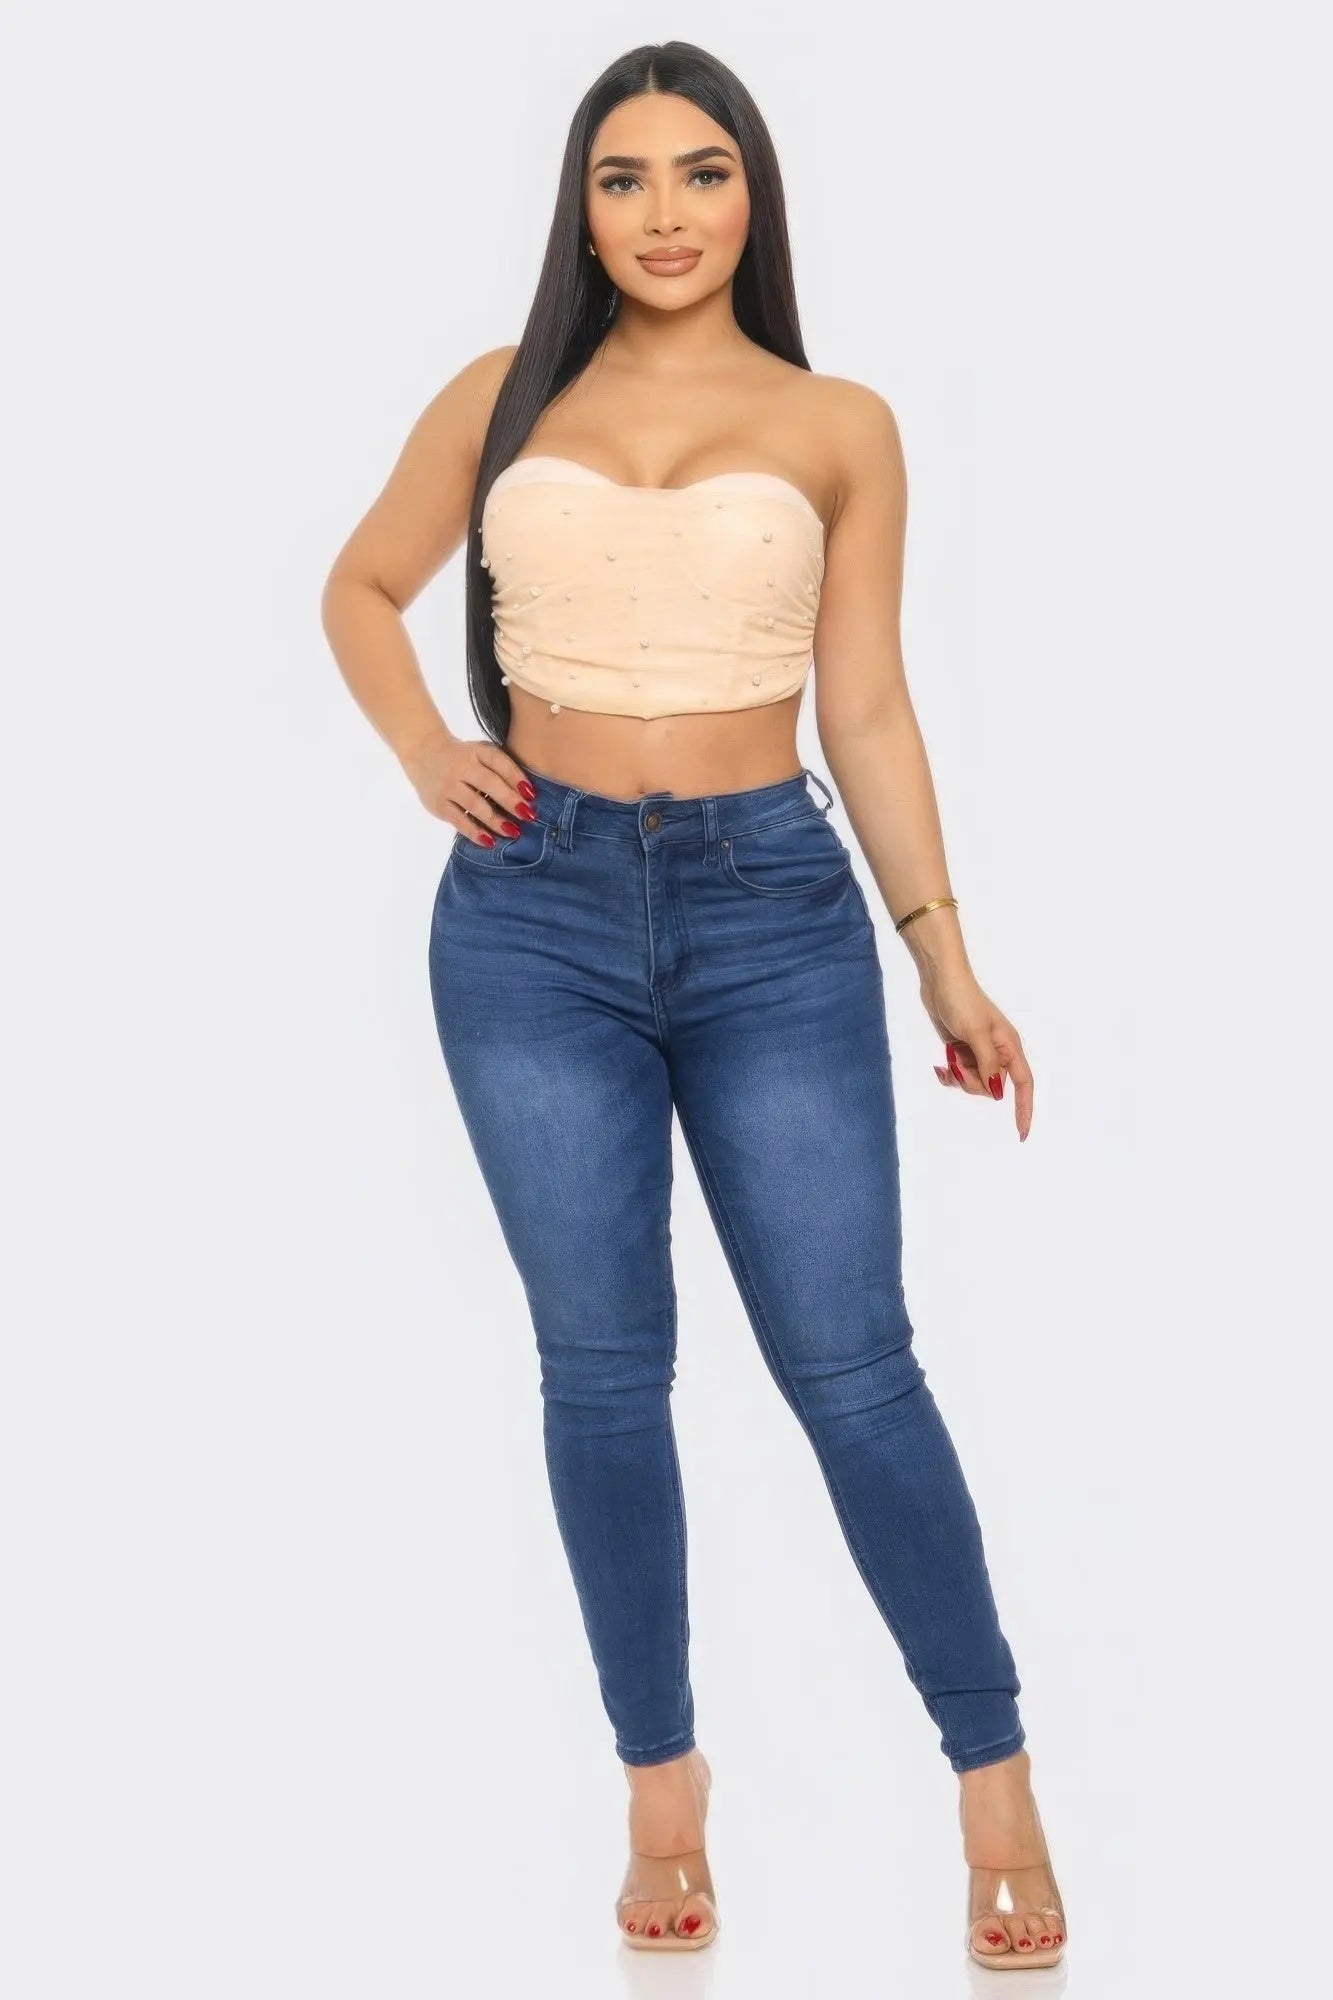 Lexi's Pearl Studded Mesh Tube Top Blue Zone Planet